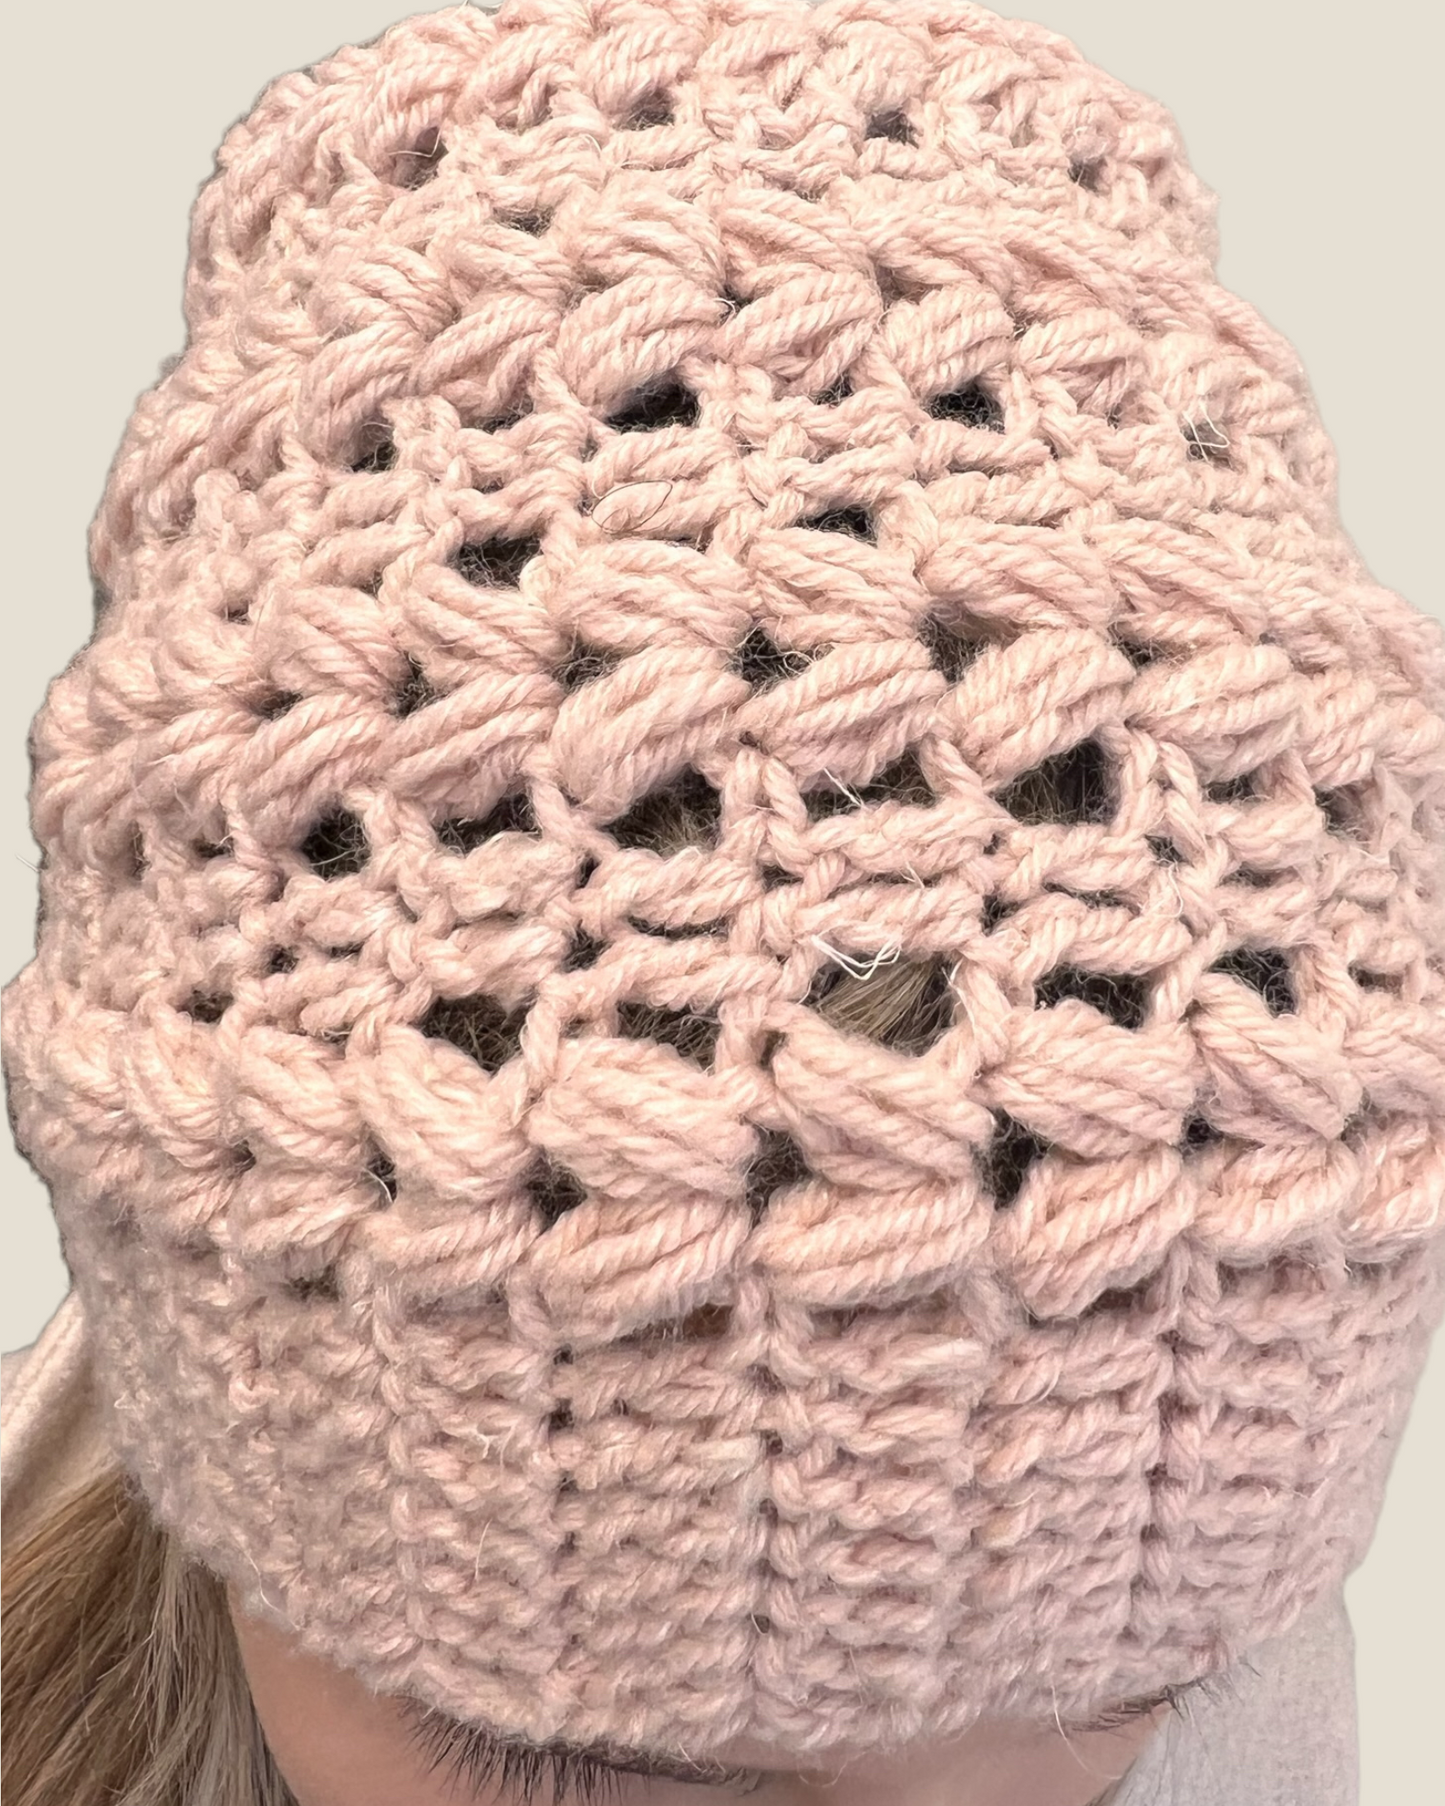 The Millenial Pink Toque